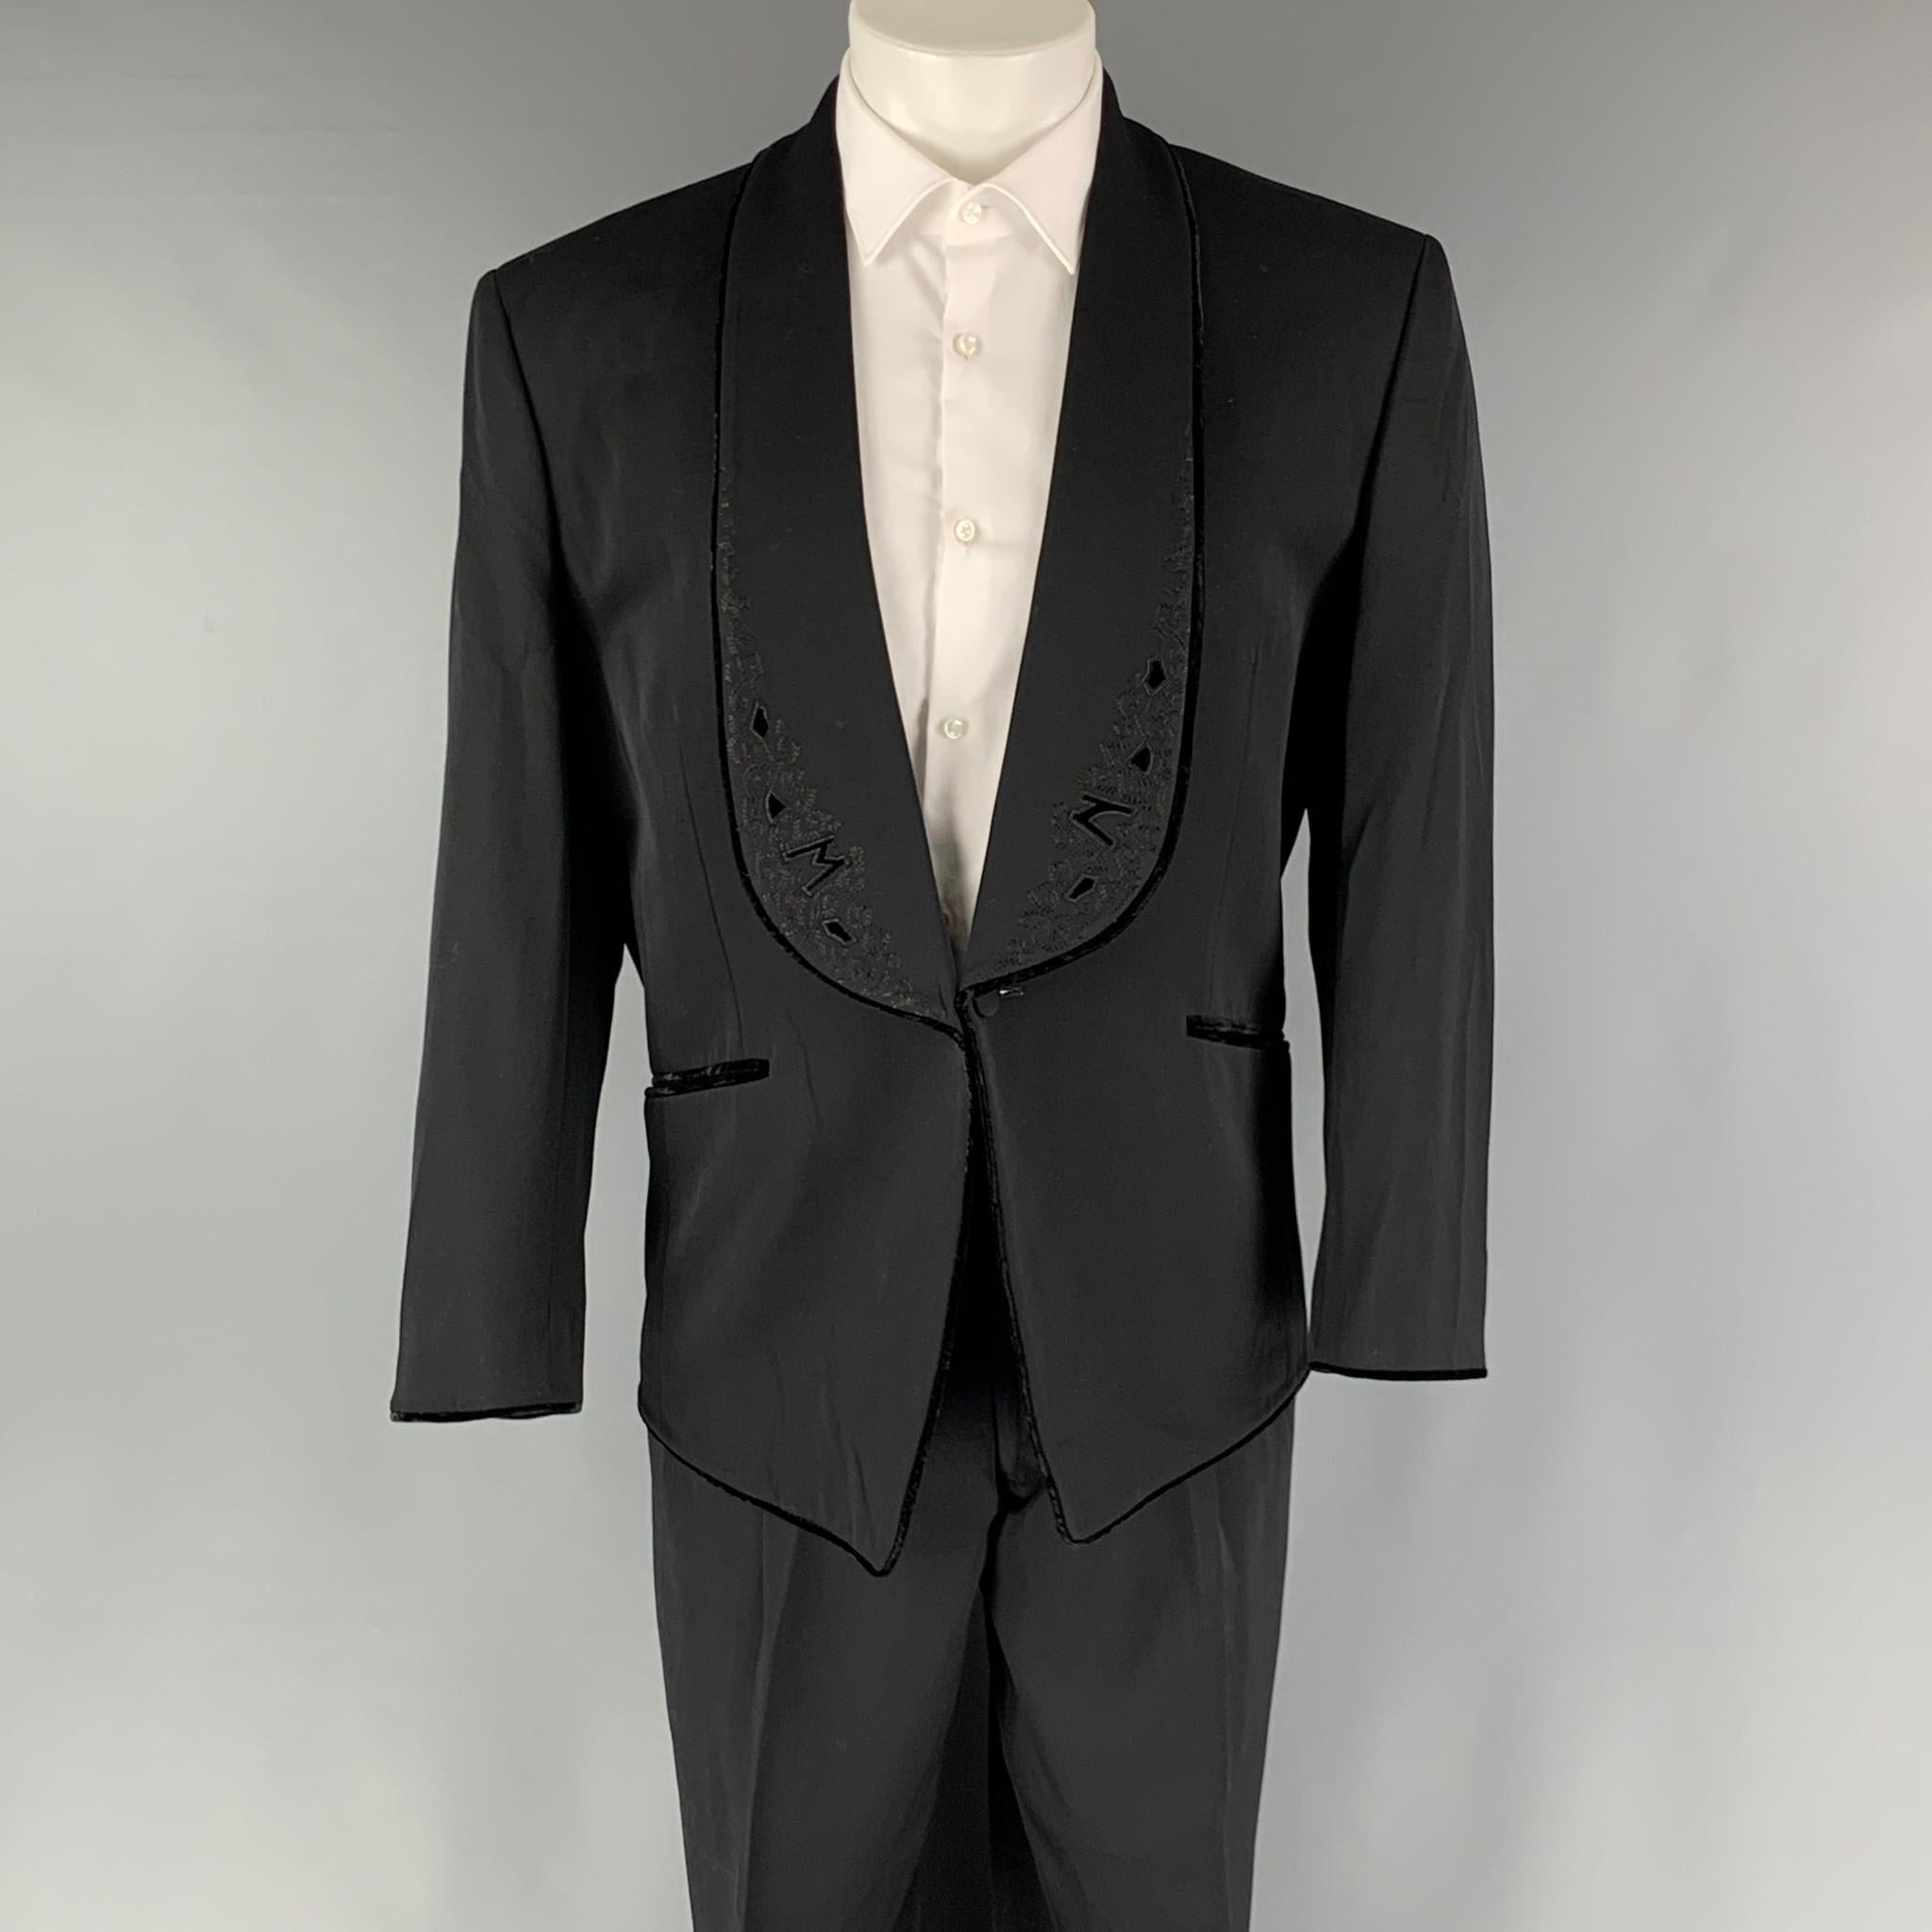 MATSUDA VINTAGE suit comes in black wool woven material with a full liner and includes a shoulder pads, velvet piping details, embroidery details, single breasted, single button sport coat with a shawl collar and matching high waist pants. Made in